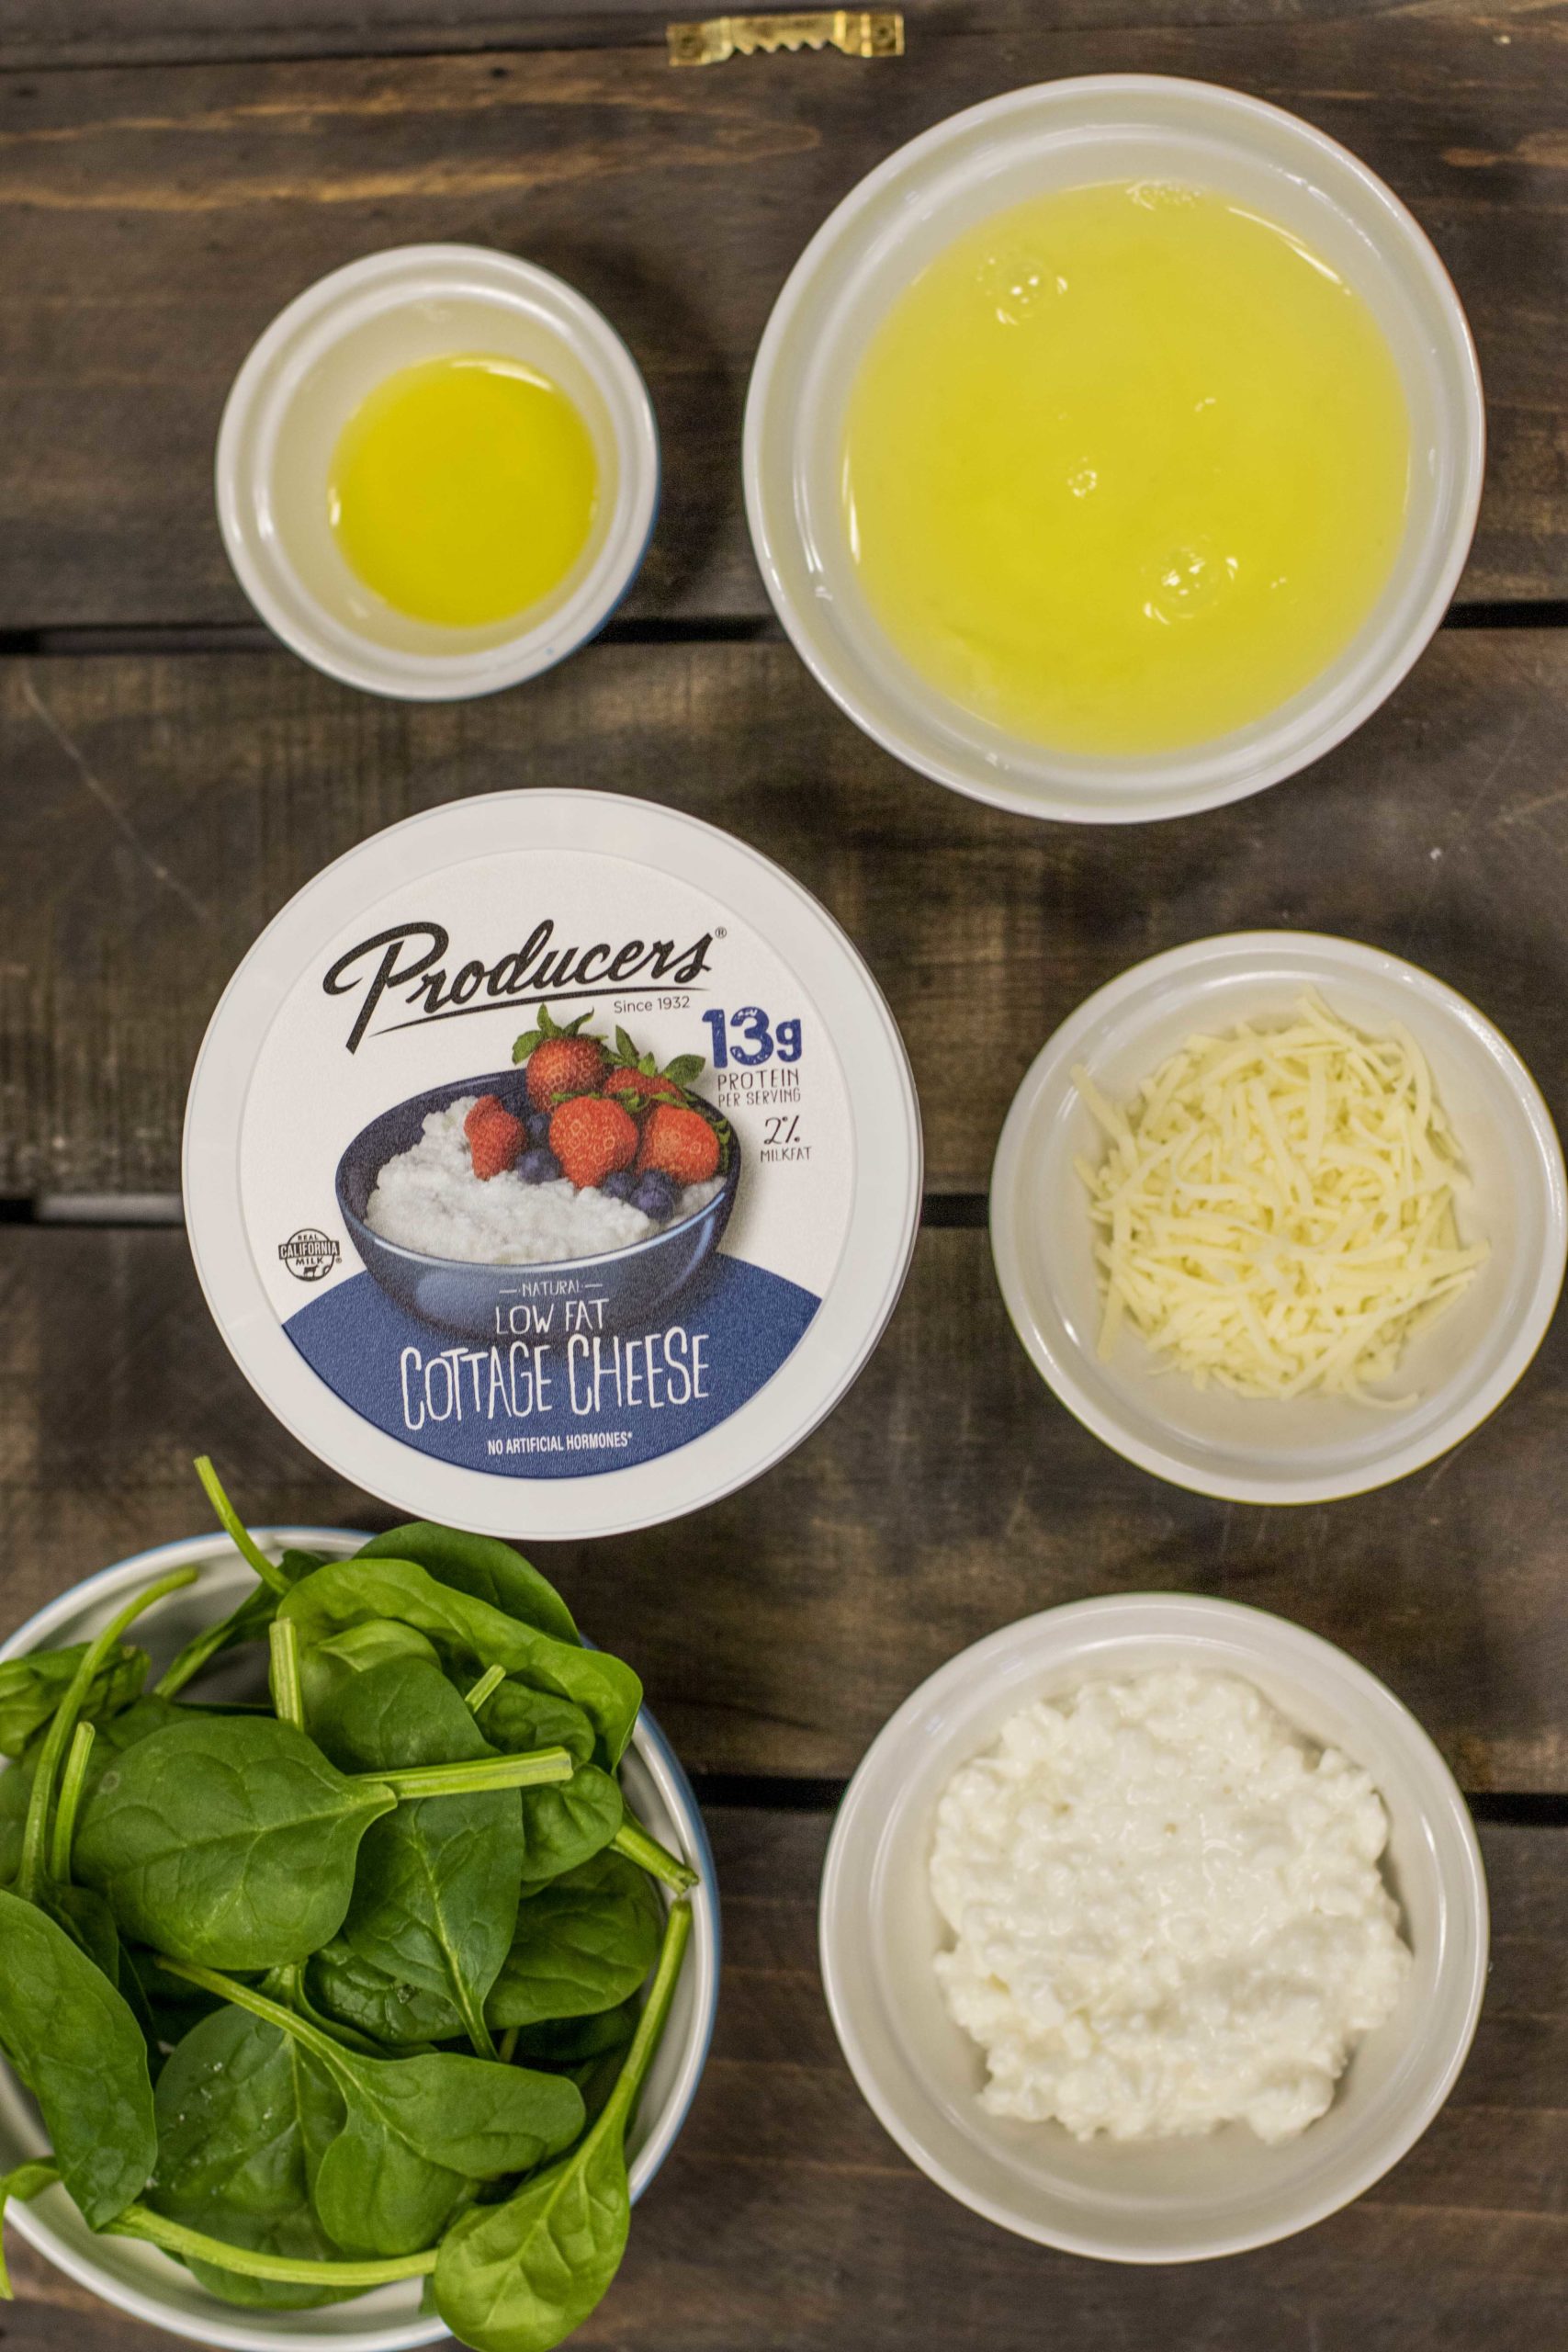 Producers Low Fat Cottage Cheese surrounded by spinach, oil, egg whites, and cheese on a wood table.